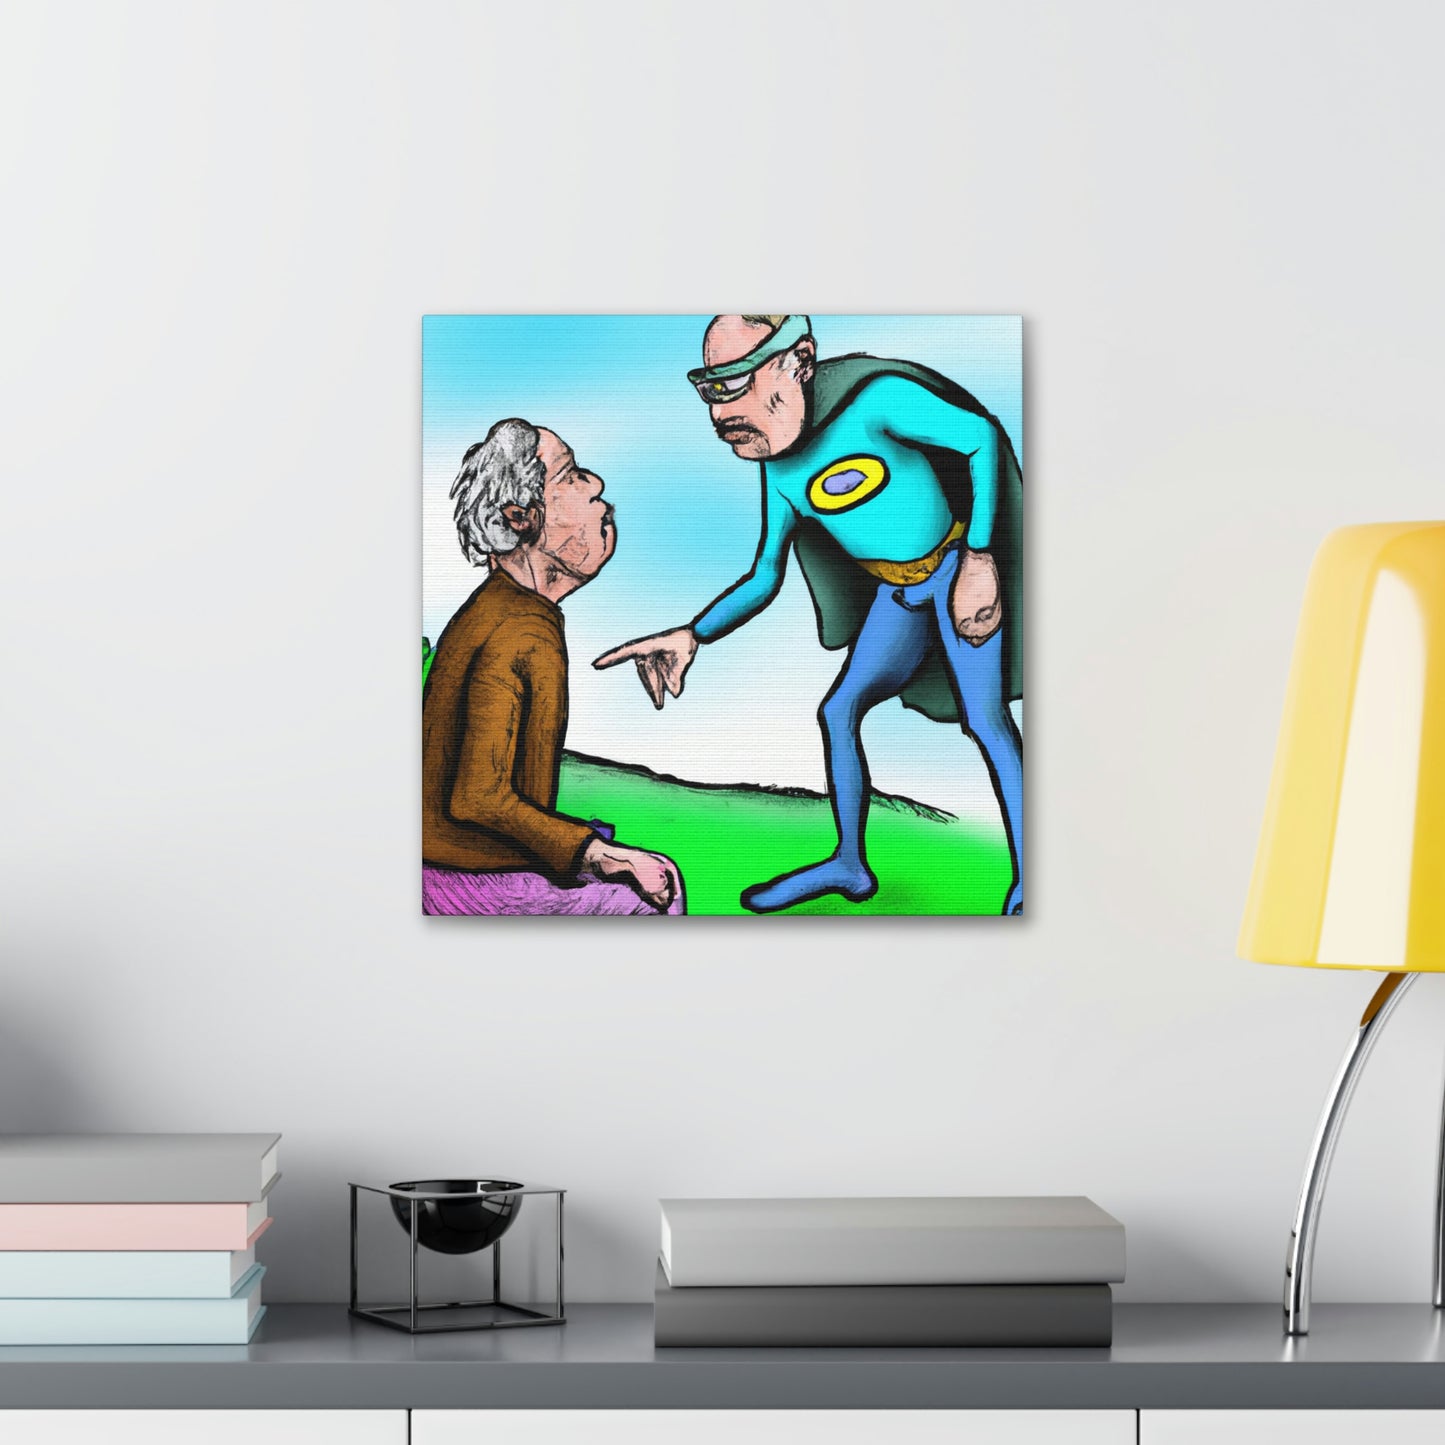 The Mysterious Stranger and the Retired Superhero - The Alien Canva